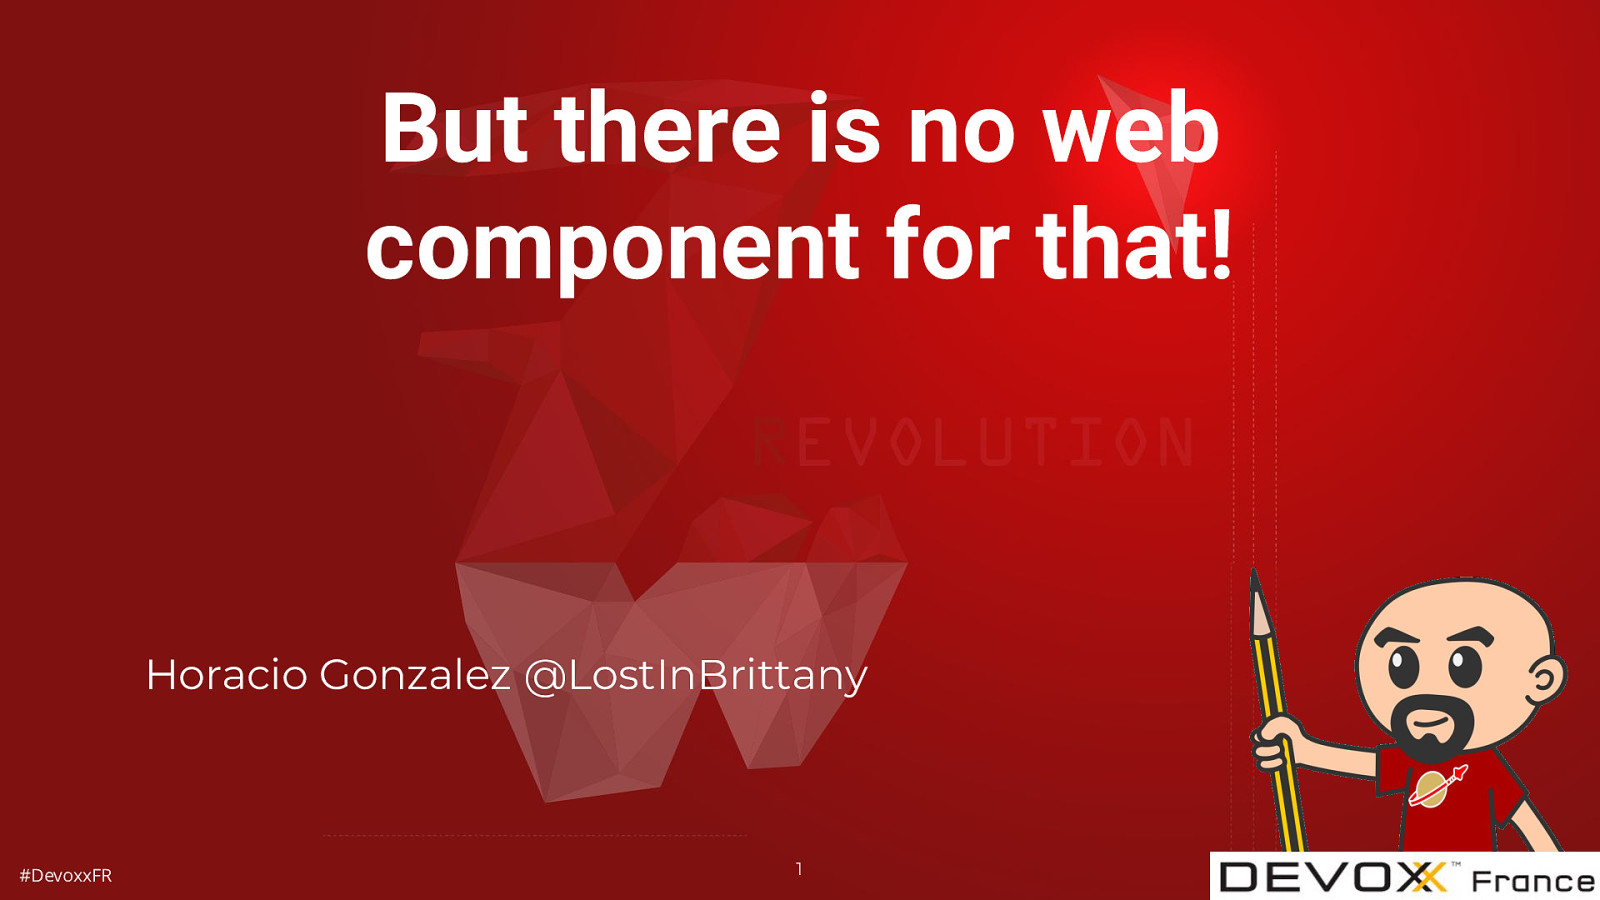 But there is no web component for that